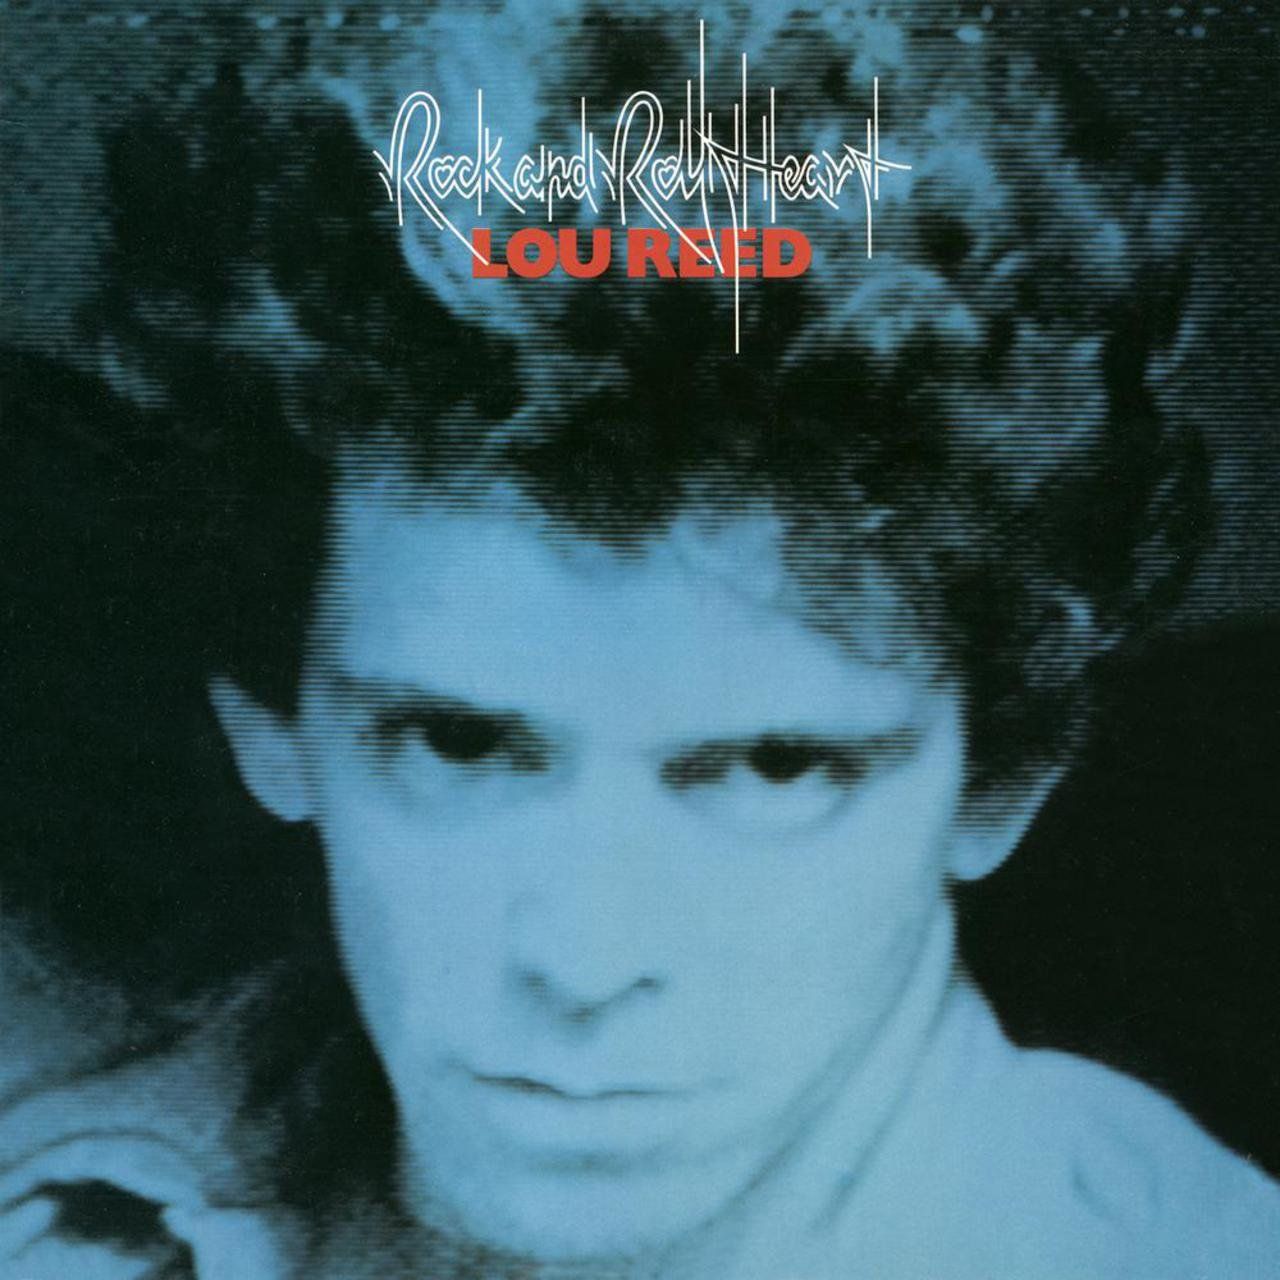 Rock & Roll Heart (Lou Reed – Artist Of The Year Part 9)